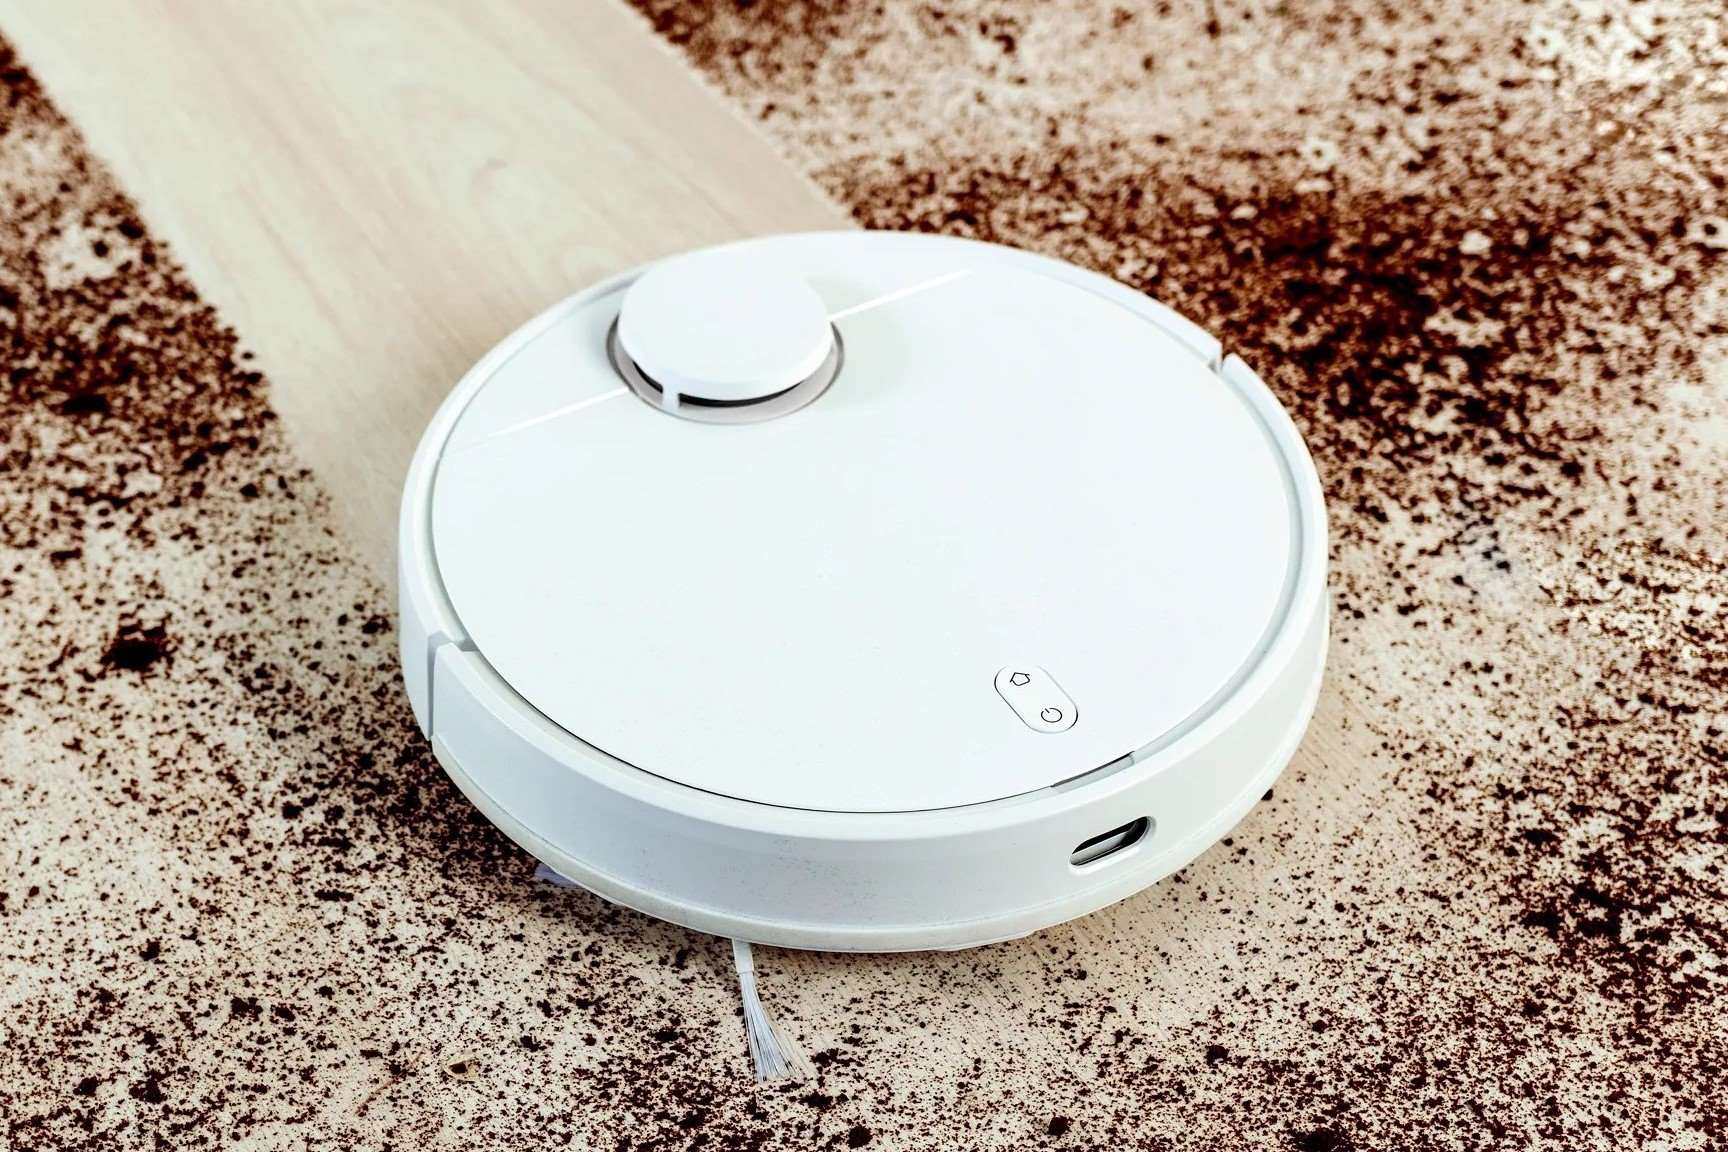 Scheduling Cleanup On Xiaomi Robot Vacuum: A Quick Tutorial